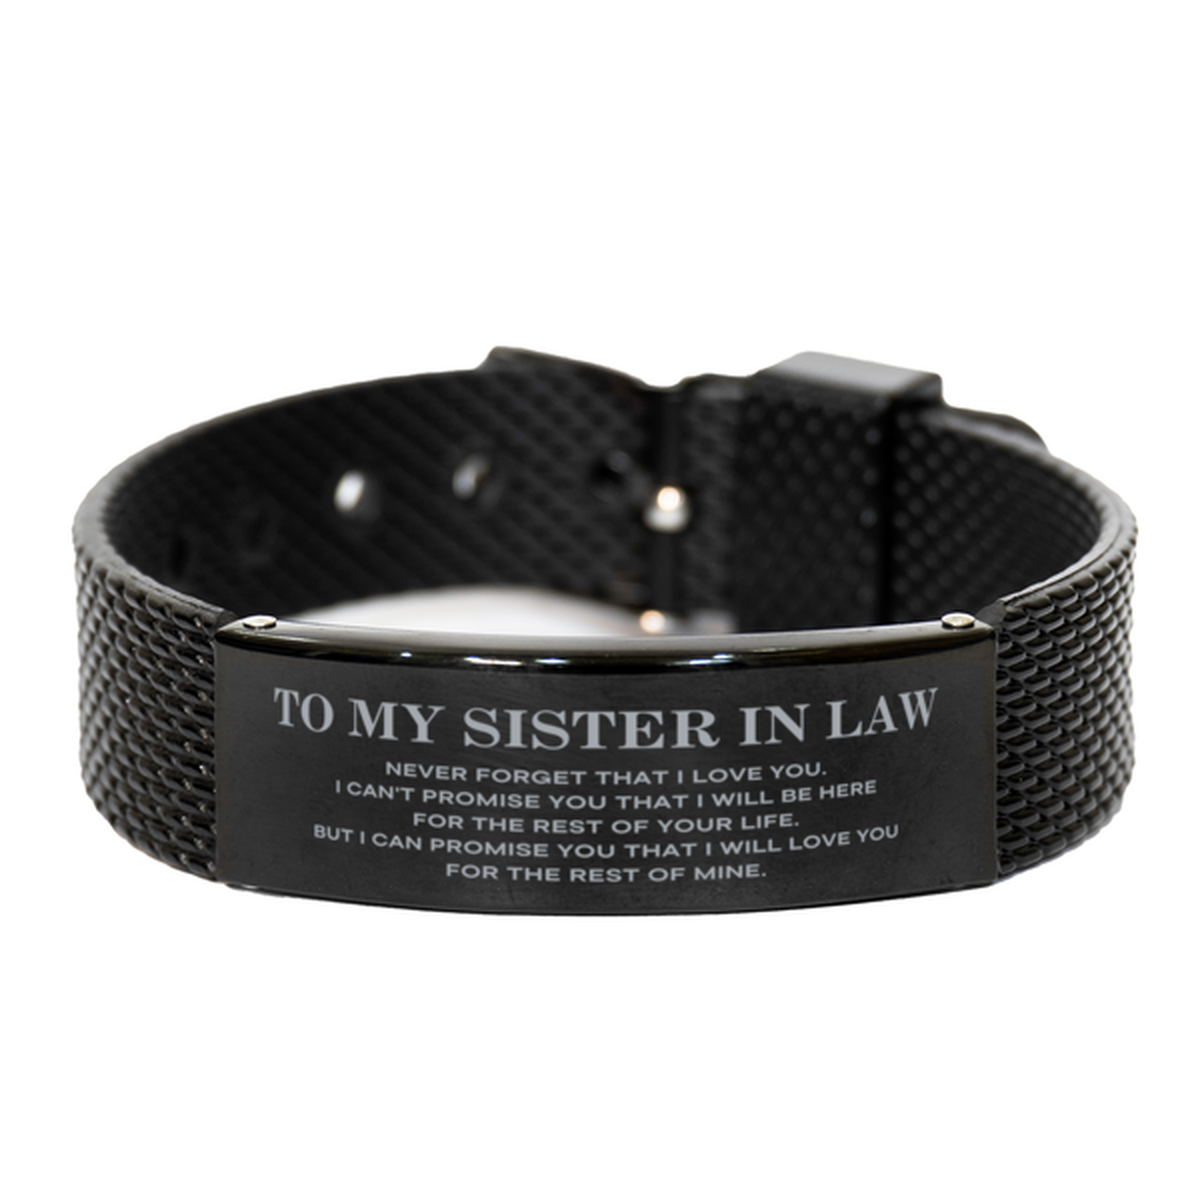 To My Sister In Law Gifts, I will love you for the rest of mine, Love Sister In Law Bracelet, Birthday Christmas Unique Black Shark Mesh Bracelet For Sister In Law